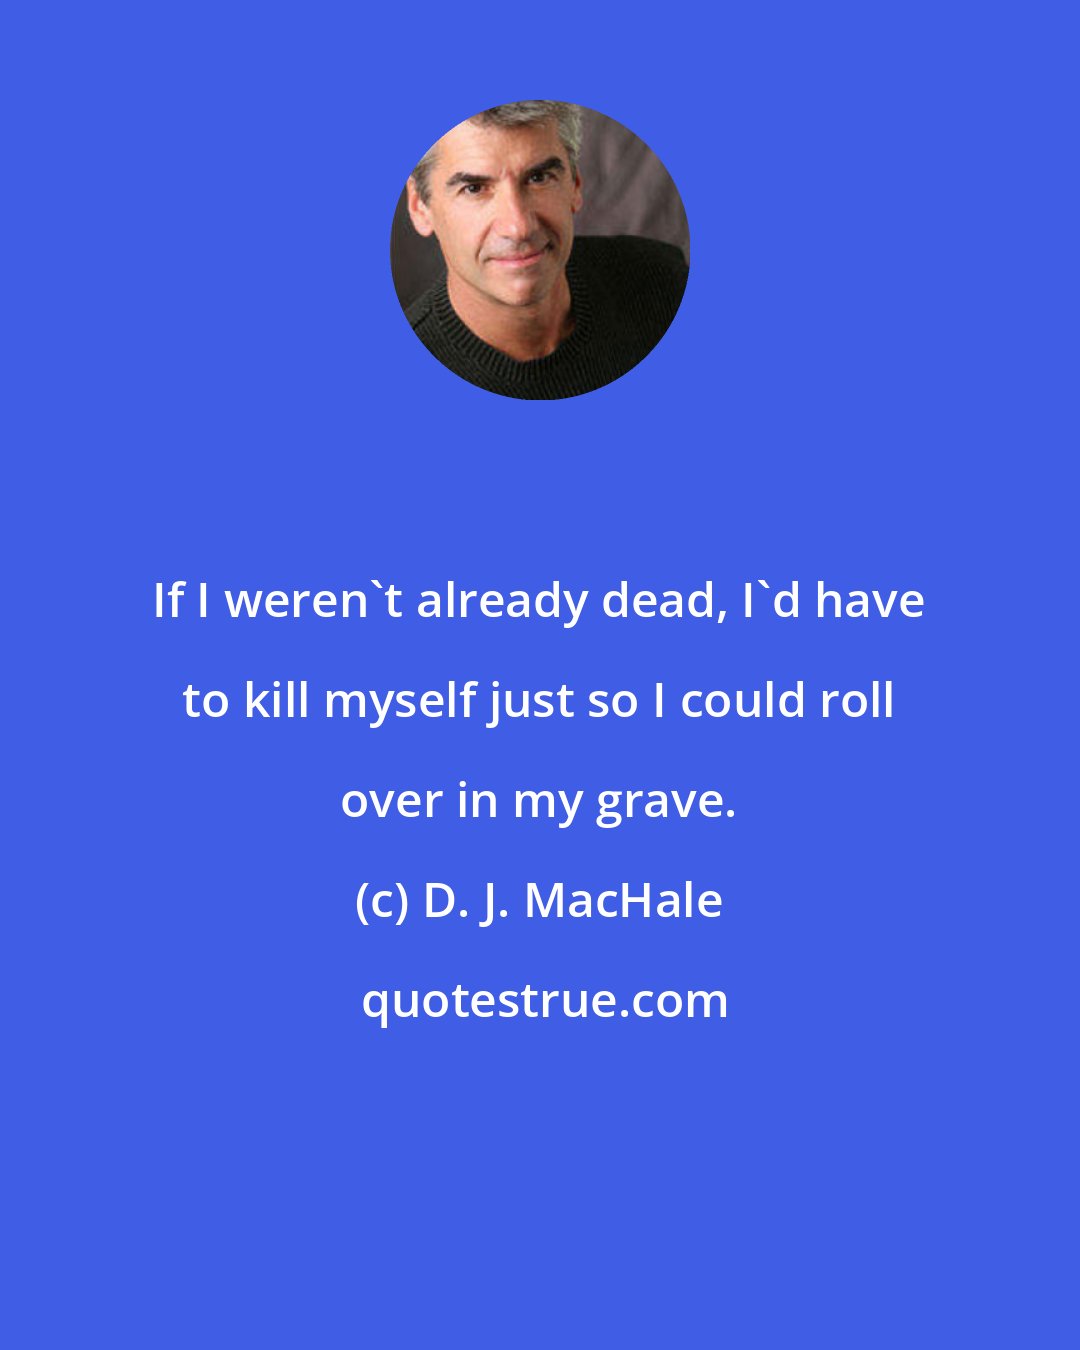 D. J. MacHale: If I weren't already dead, I'd have to kill myself just so I could roll over in my grave.